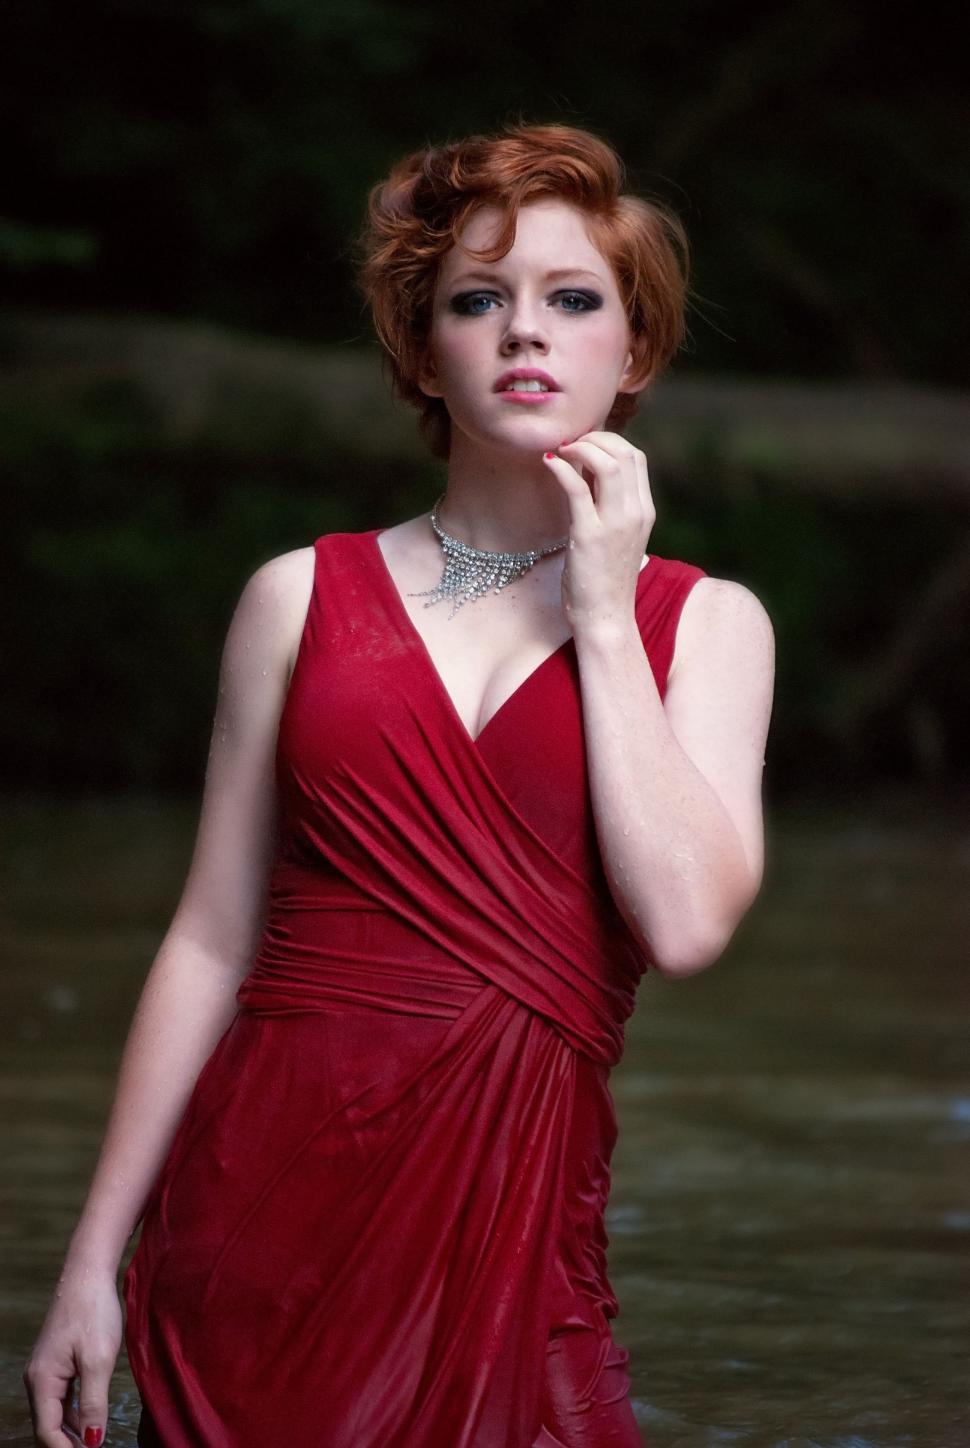 Free Image of Young Female Fashion Model in Wet Red Dress - Looking at camera  